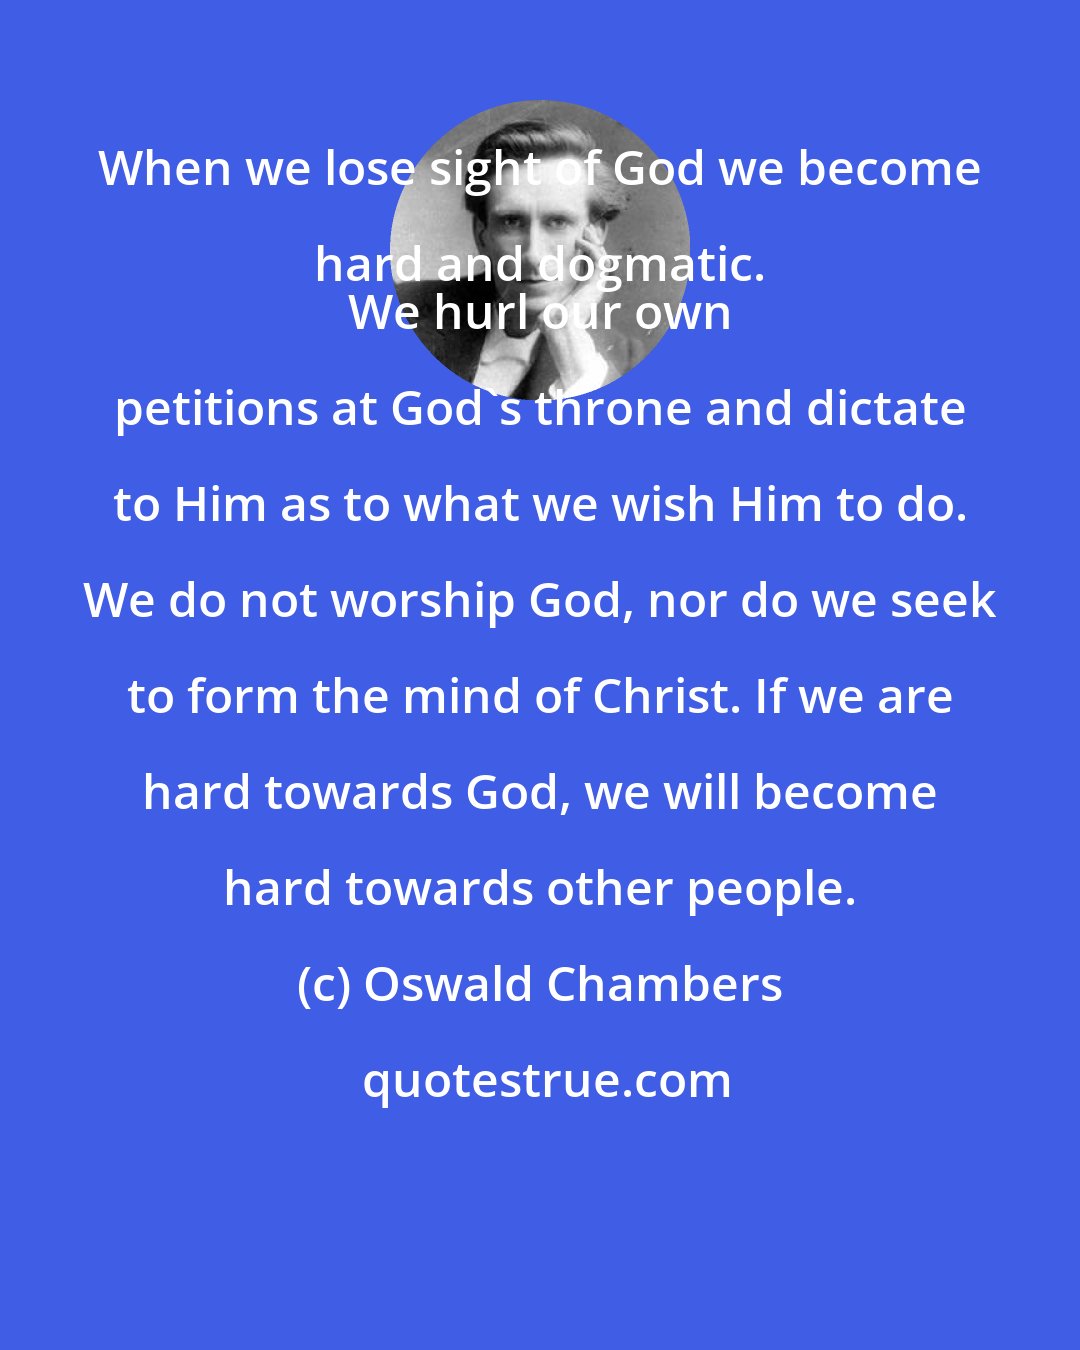 Oswald Chambers: When we lose sight of God we become hard and dogmatic. 
 We hurl our own petitions at God's throne and dictate to Him as to what we wish Him to do. We do not worship God, nor do we seek to form the mind of Christ. If we are hard towards God, we will become hard towards other people.